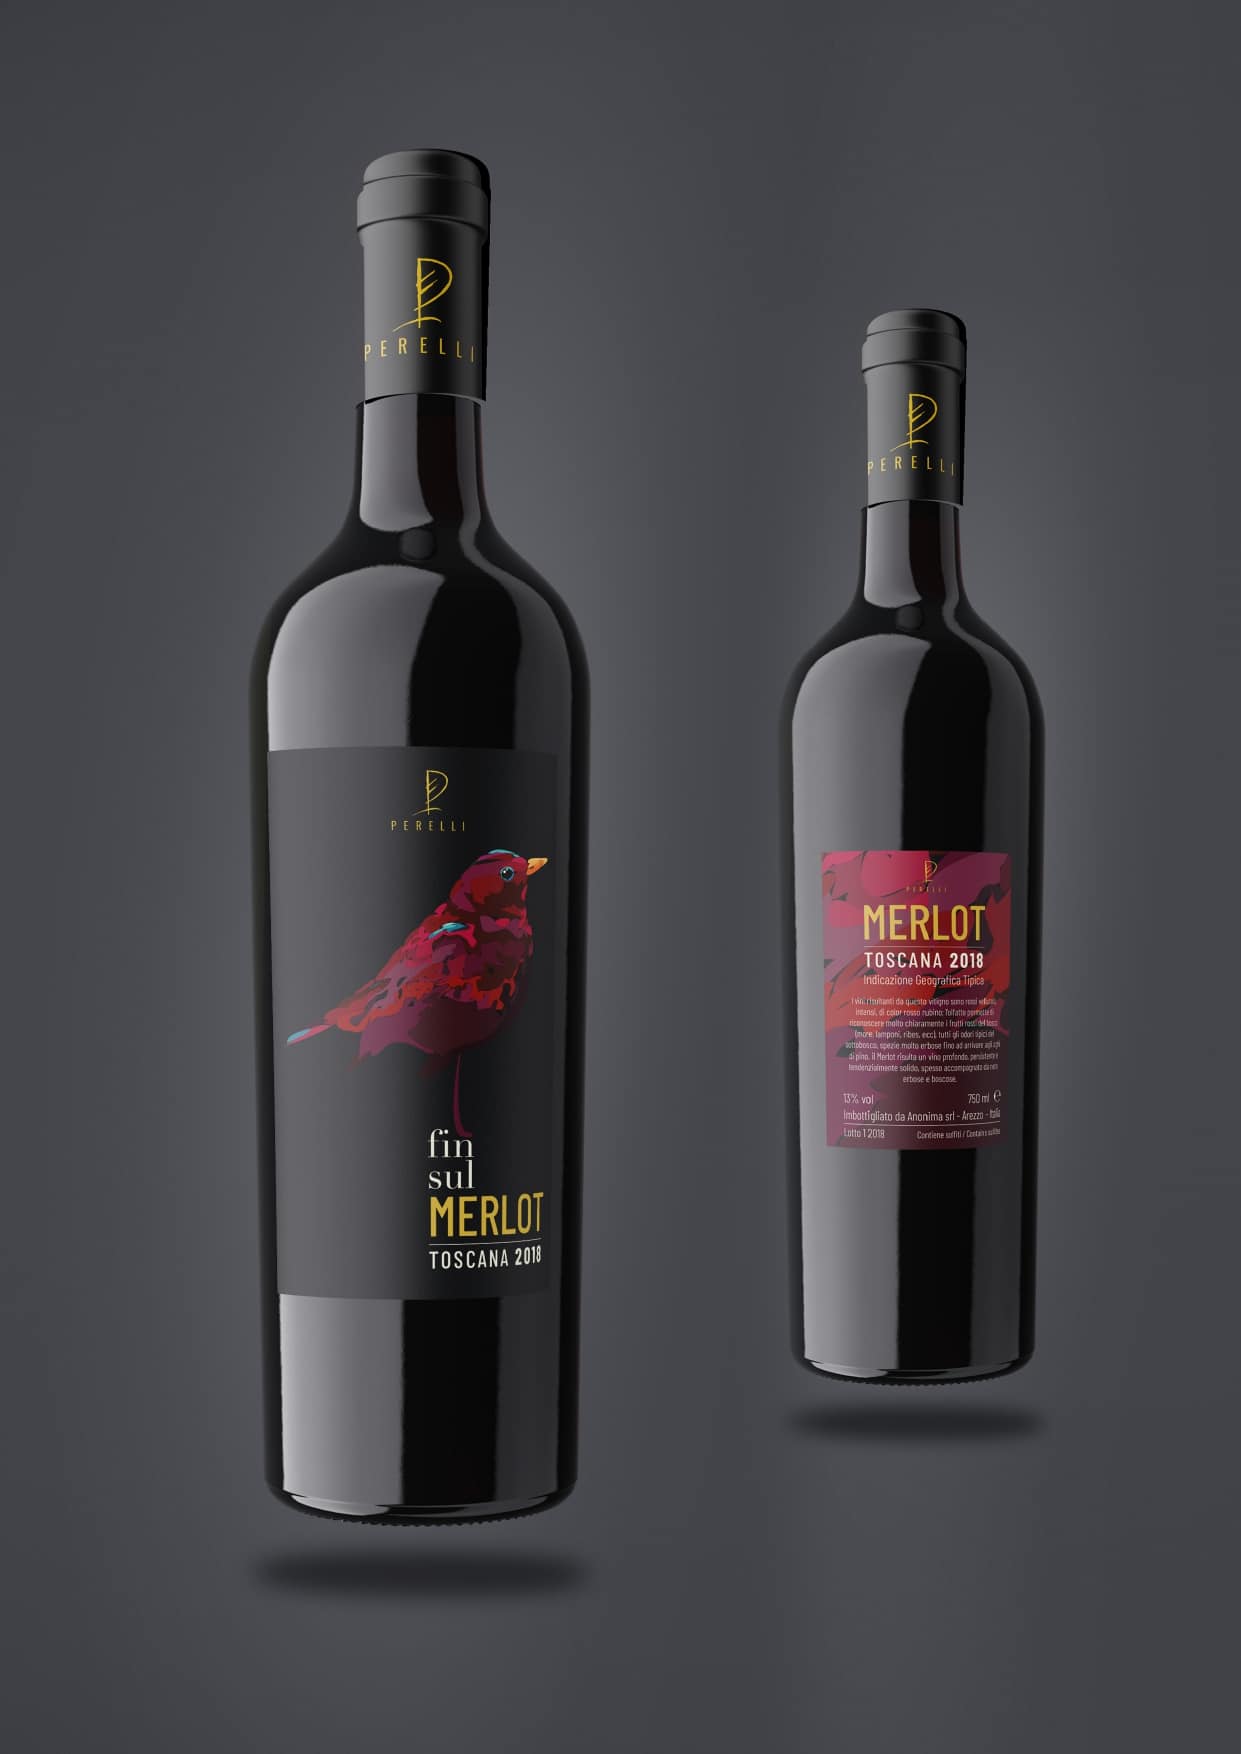 Perelliwinery-Merlot2018-progetto_page-0005